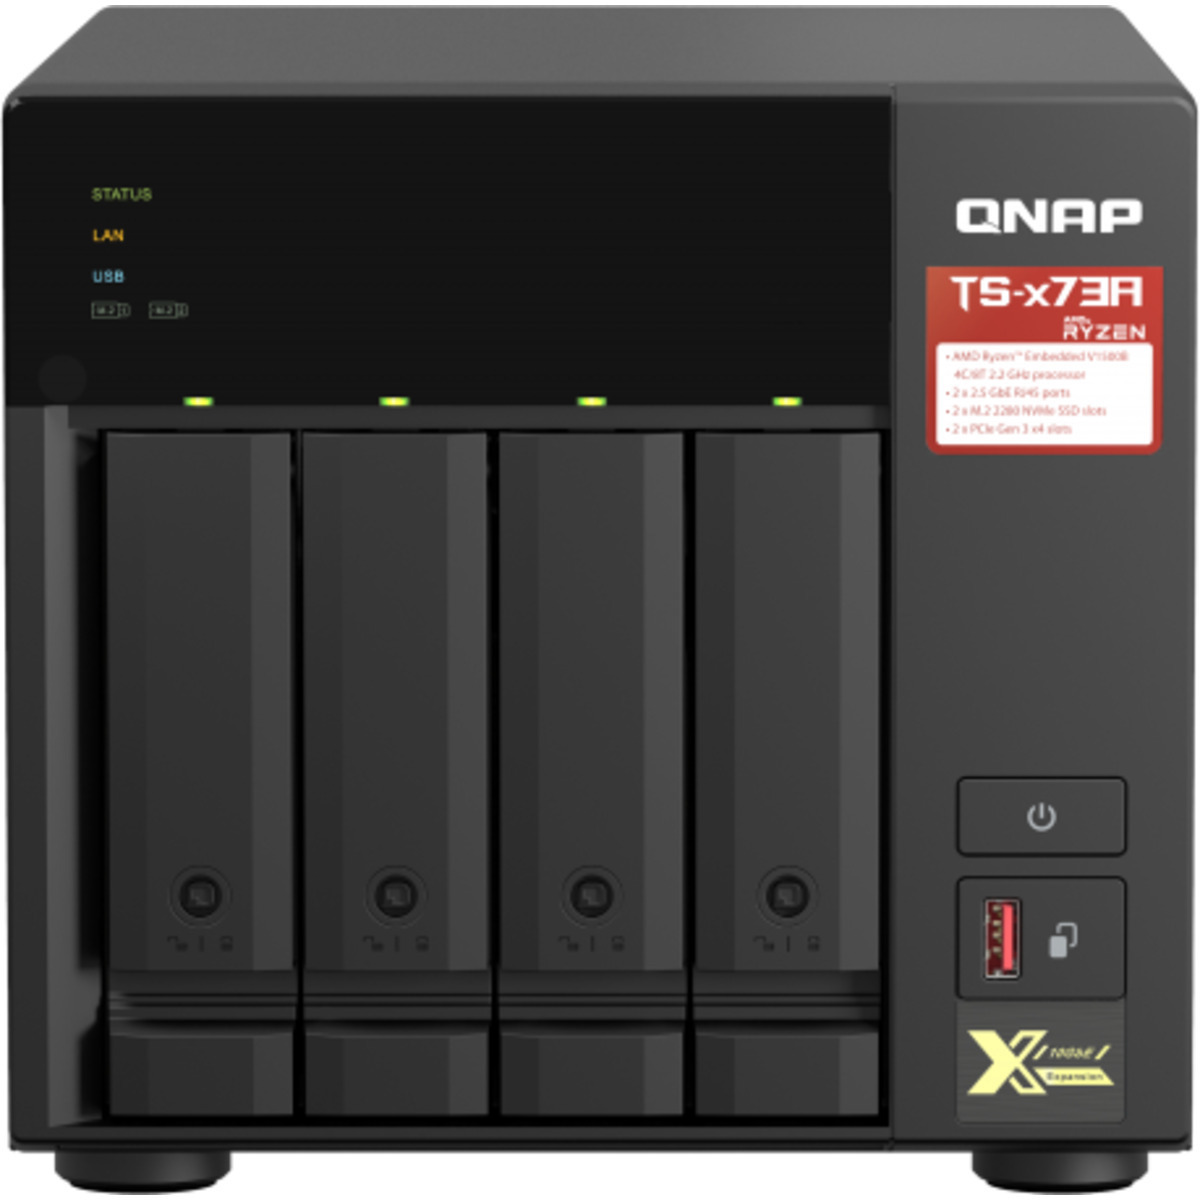 QNAP TS-473A 32tb 4-Bay Desktop Multimedia / Power User / Business NAS - Network Attached Storage Device 4x8tb Seagate IronWolf ST8000VN004 3.5 7200rpm SATA 6Gb/s HDD NAS Class Drives Installed - Burn-In Tested TS-473A